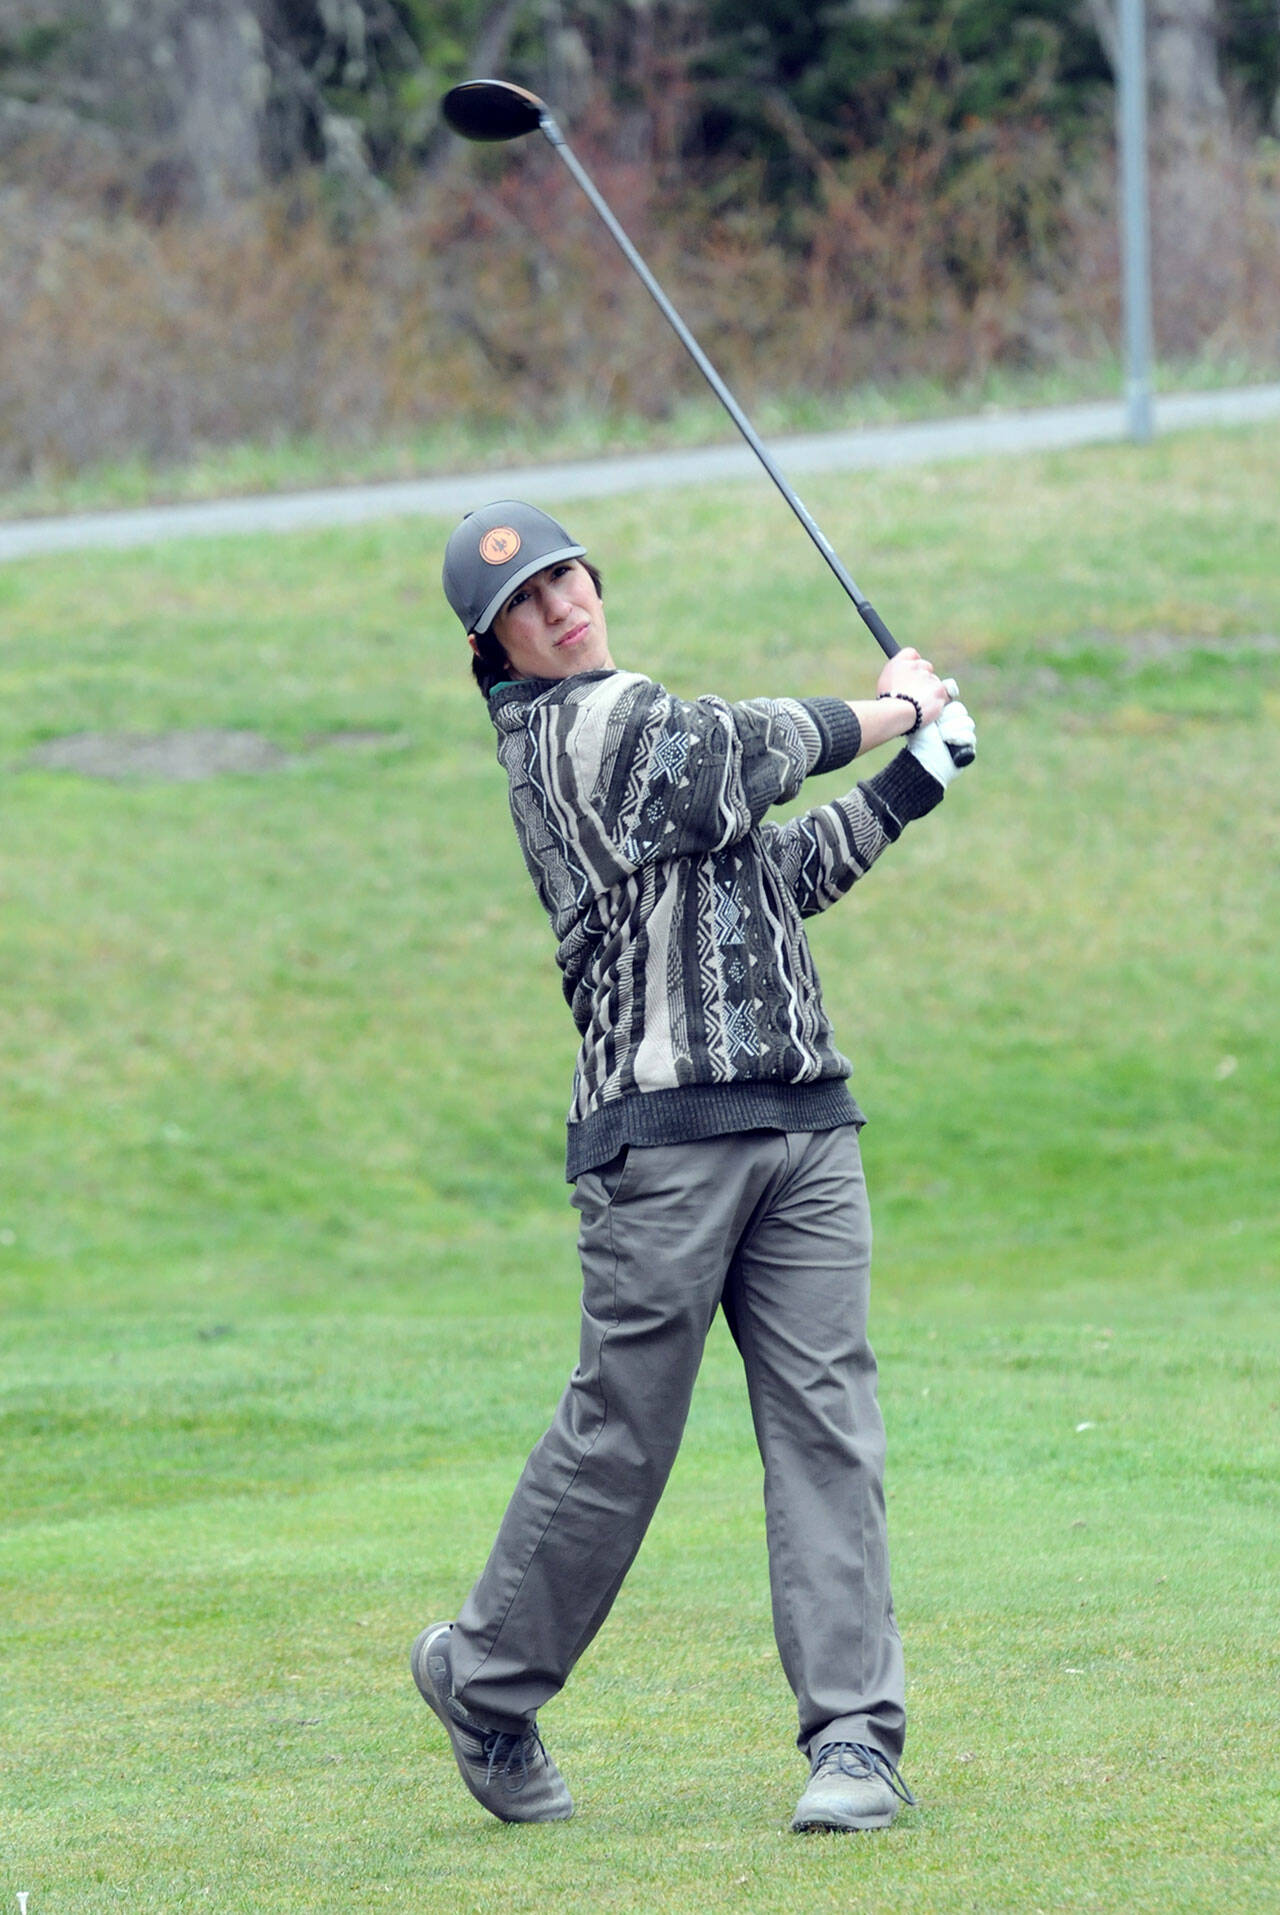 KEITH THORPE/PENINSULA DAILY NEWS Port Angeles’ Phoenix Flores tees off on the first hole at Peninsula Golf Course in Port Angeles on Thursday.